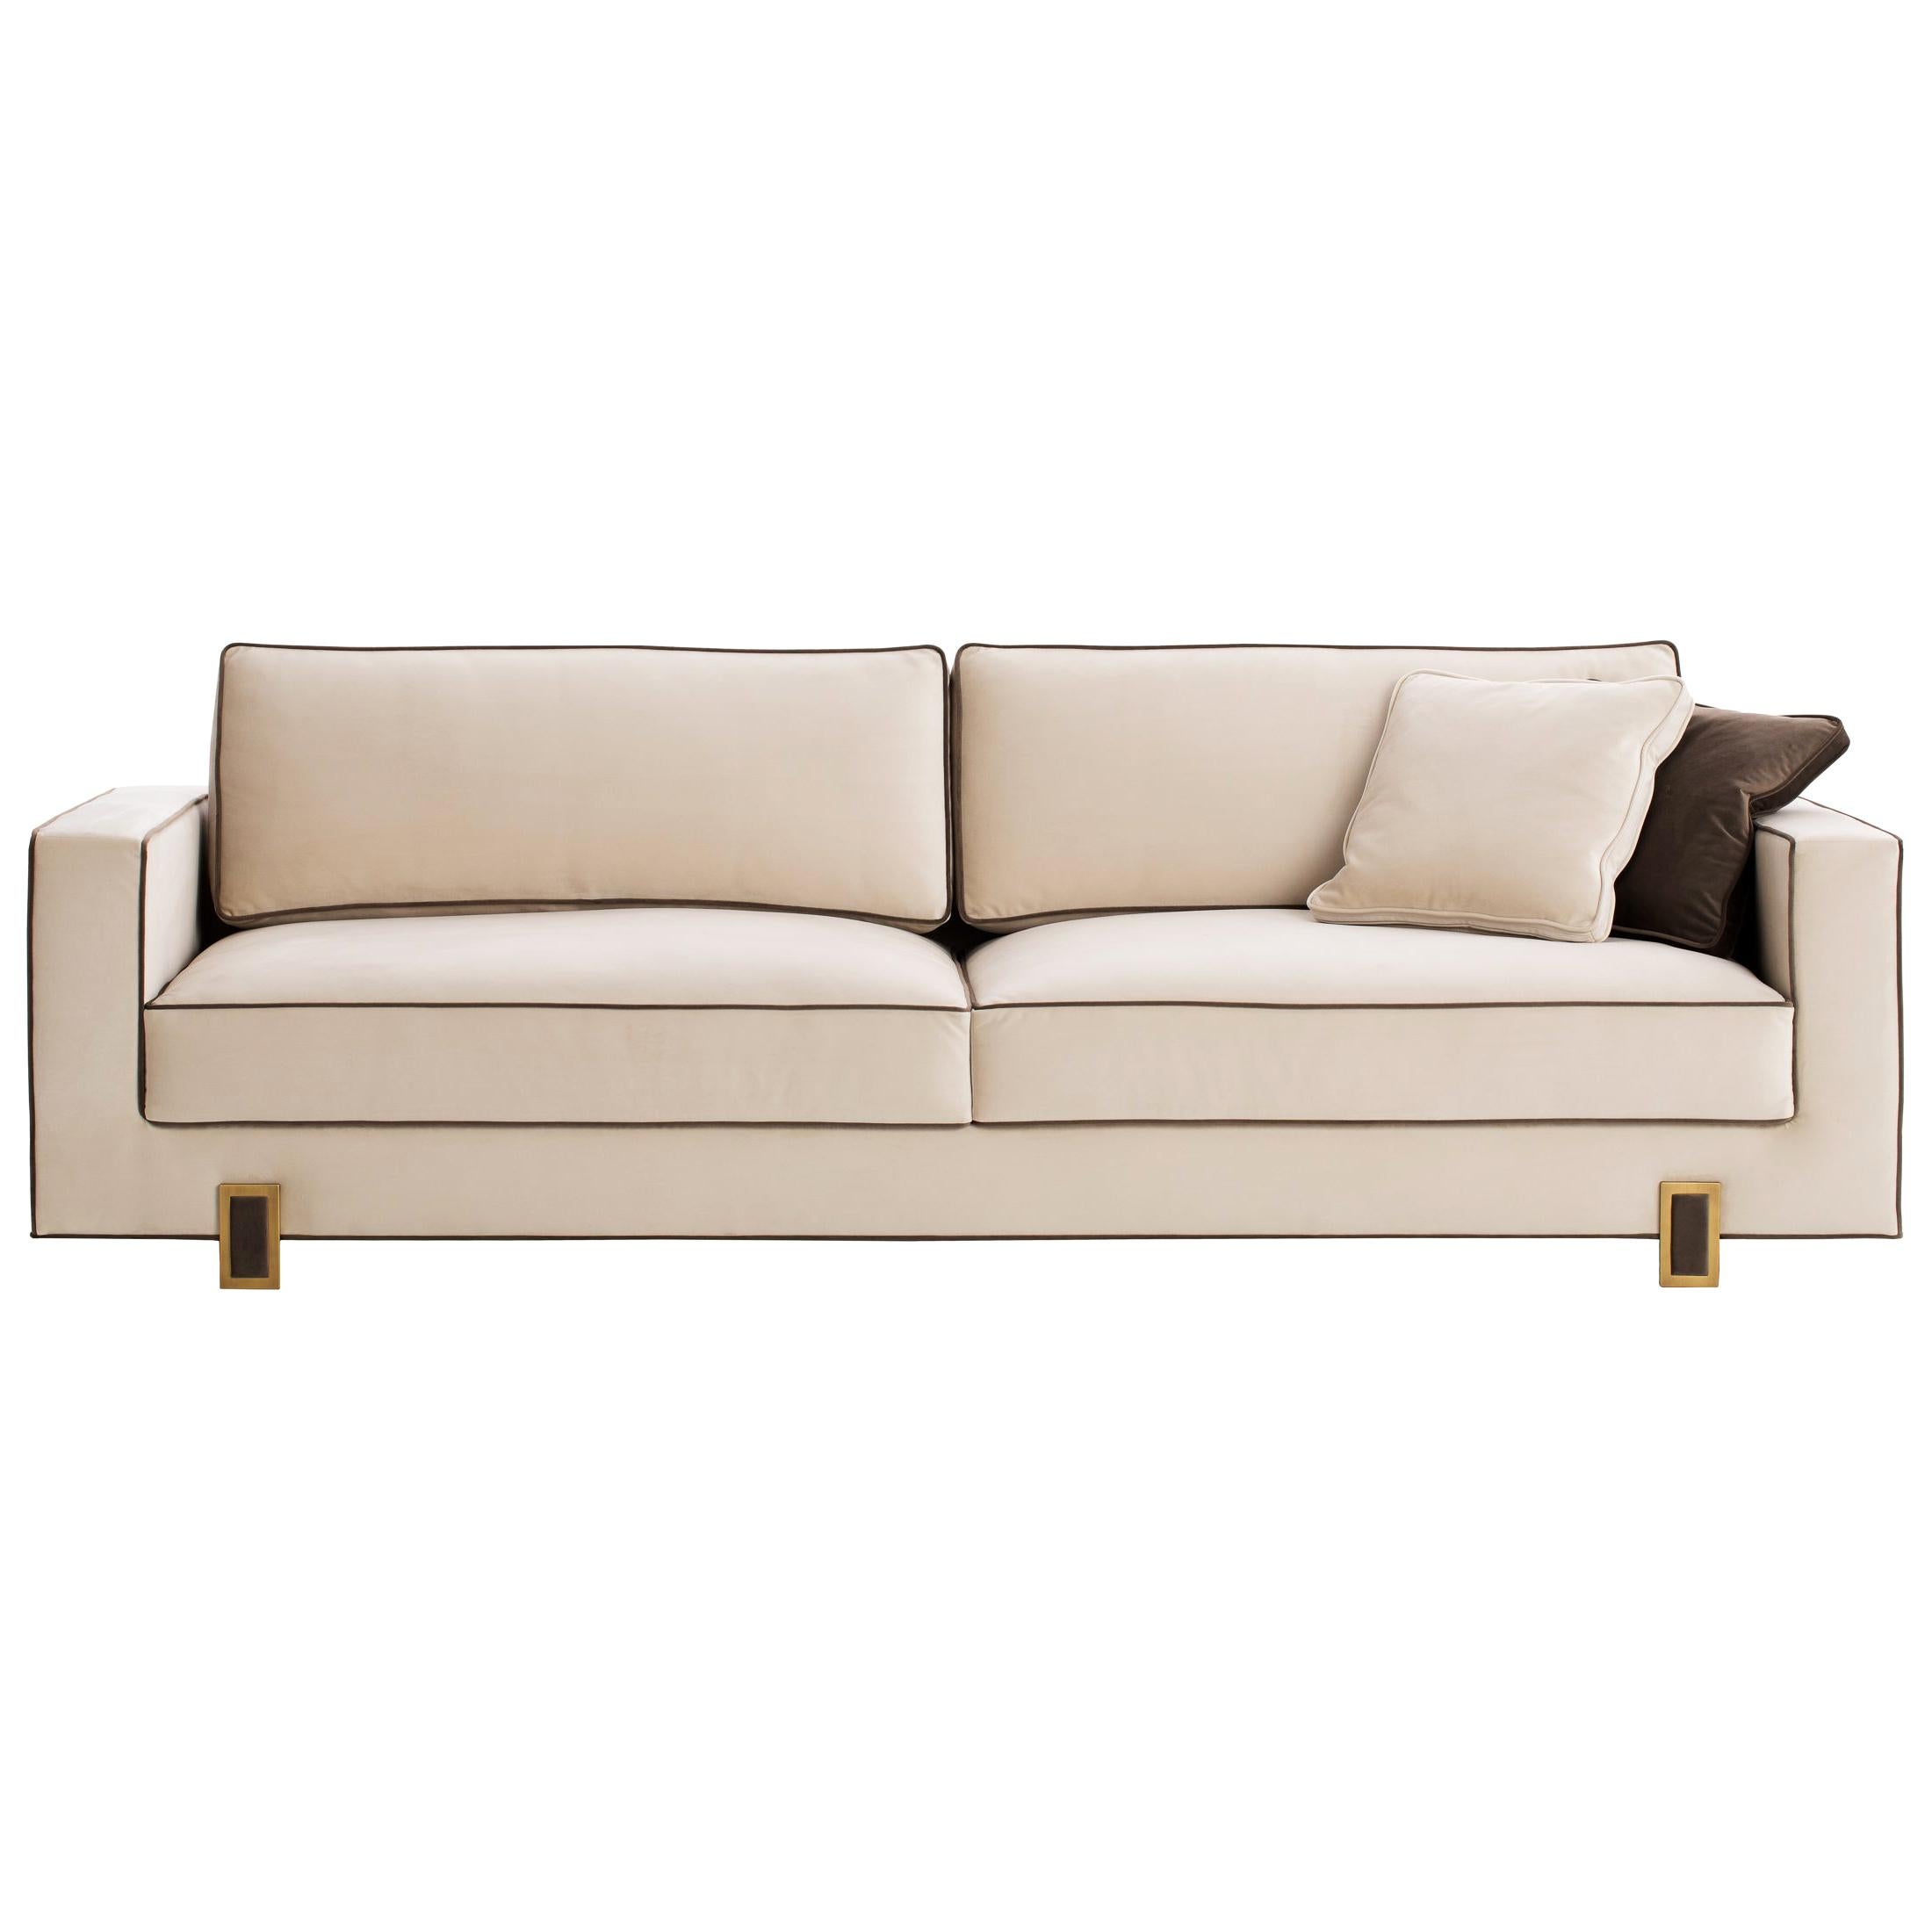 LUSO 3-seater sofa For Sale